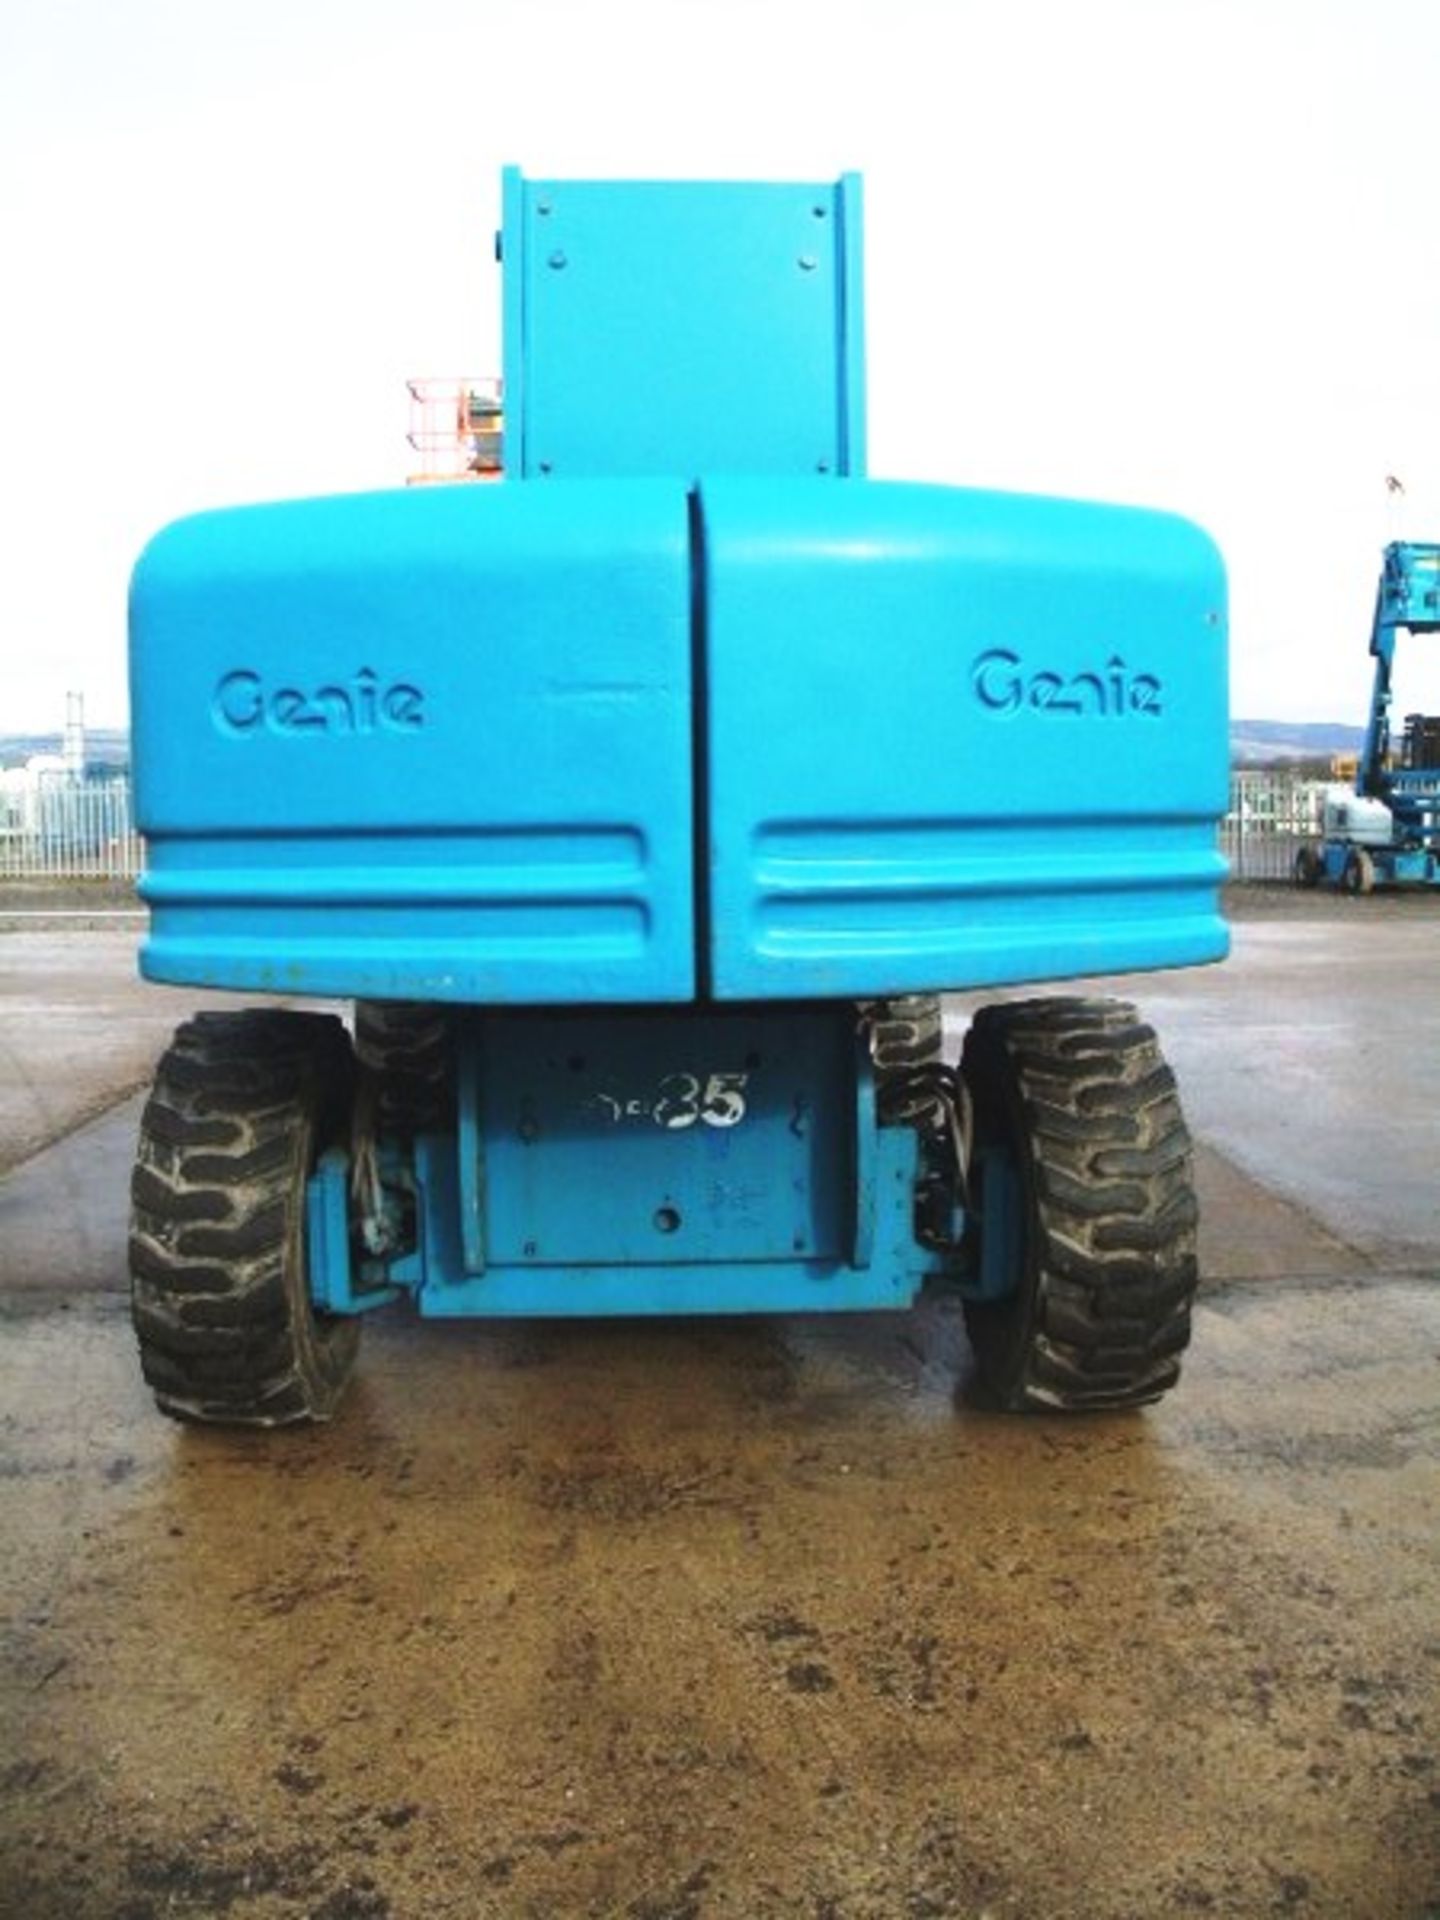 1999 GENIE 4X4 S85, s/n -1256, 5795hrs (verified), new alternator fitted 4 months ago, solid tyres. - Image 9 of 11